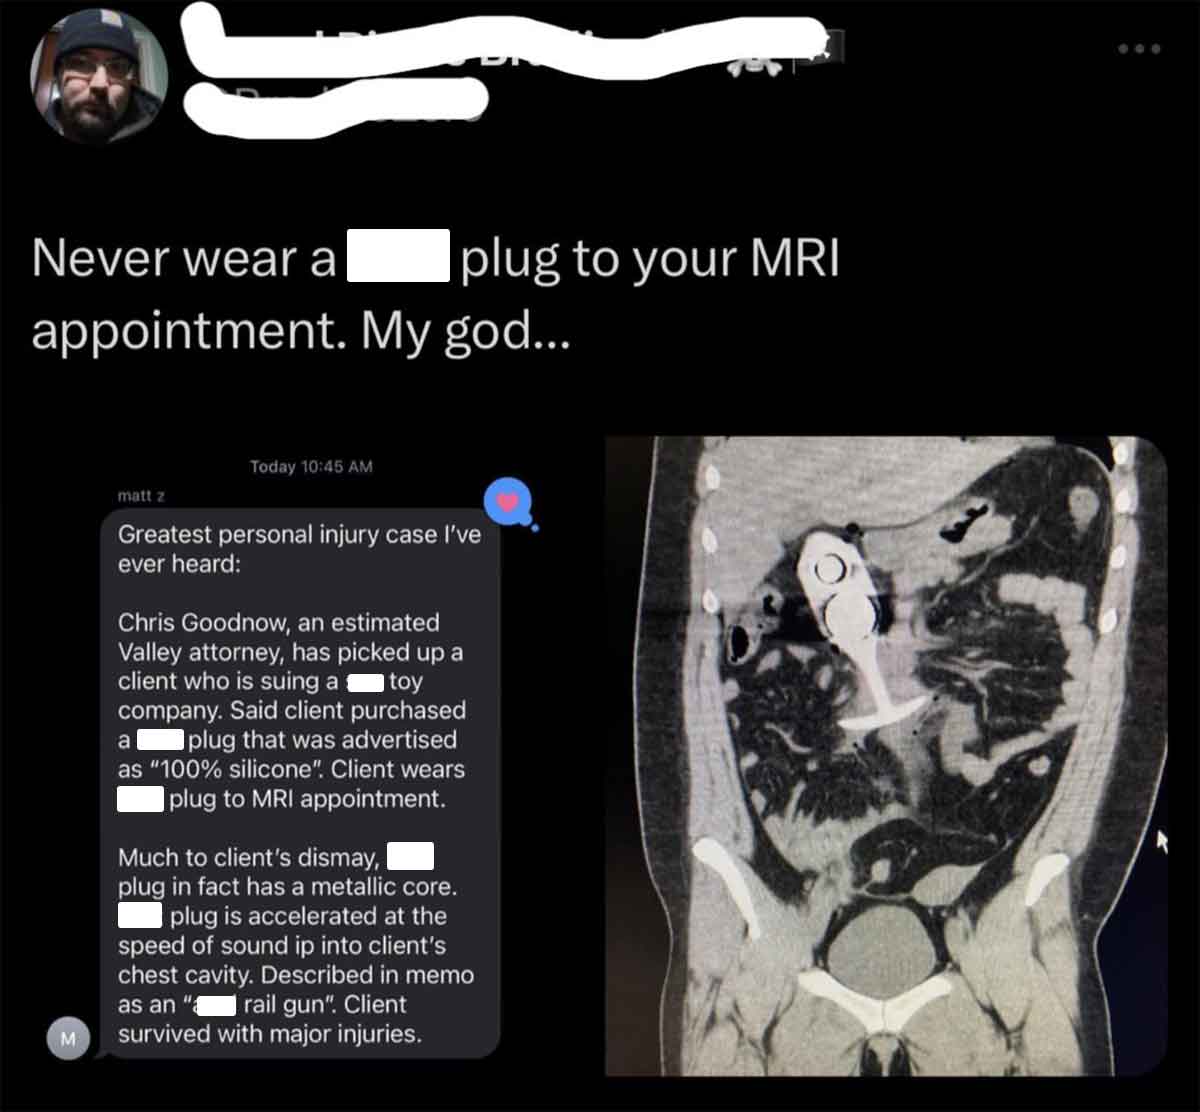 screenshot - Never wear a plug to your Mri appointment. My god... matt z Today M Greatest personal injury case I've ever heard Chris Goodnow, an estimated Valley attorney, has picked up a client who is suing a toy company. Said client purchased plug that